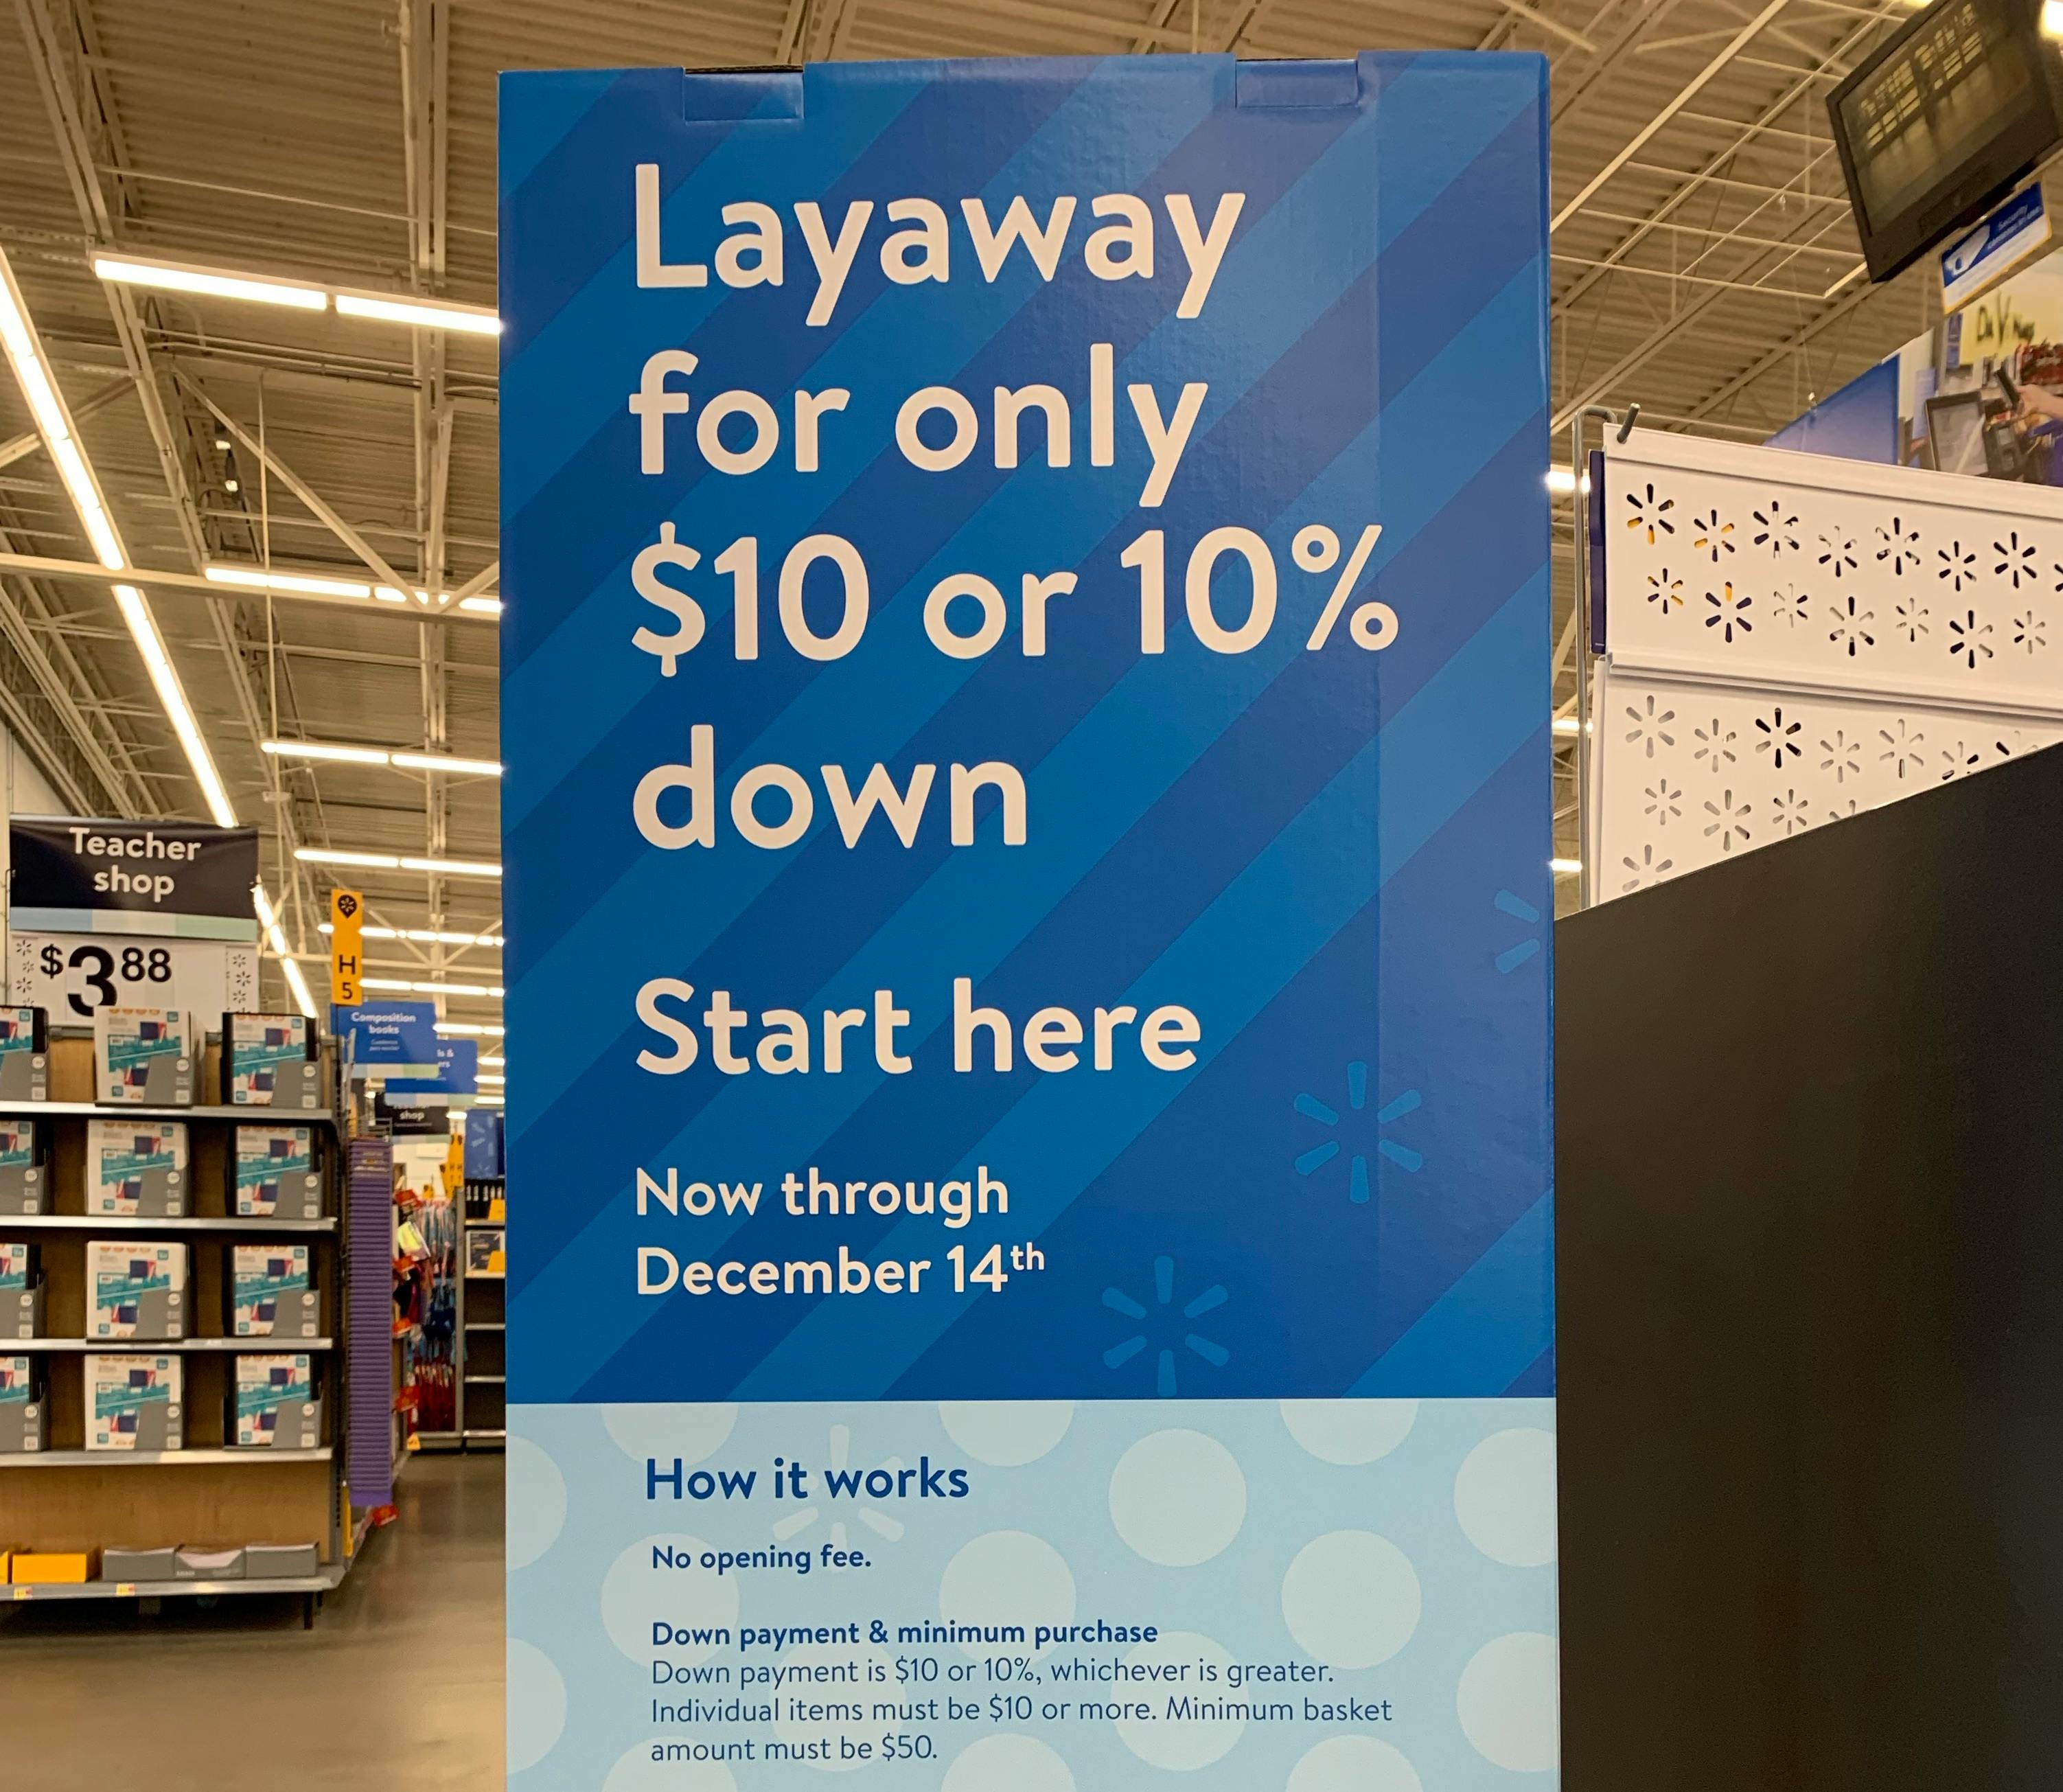 Walmart Layaway Is Gone, but RUN from Affirm! Here's a solution ...